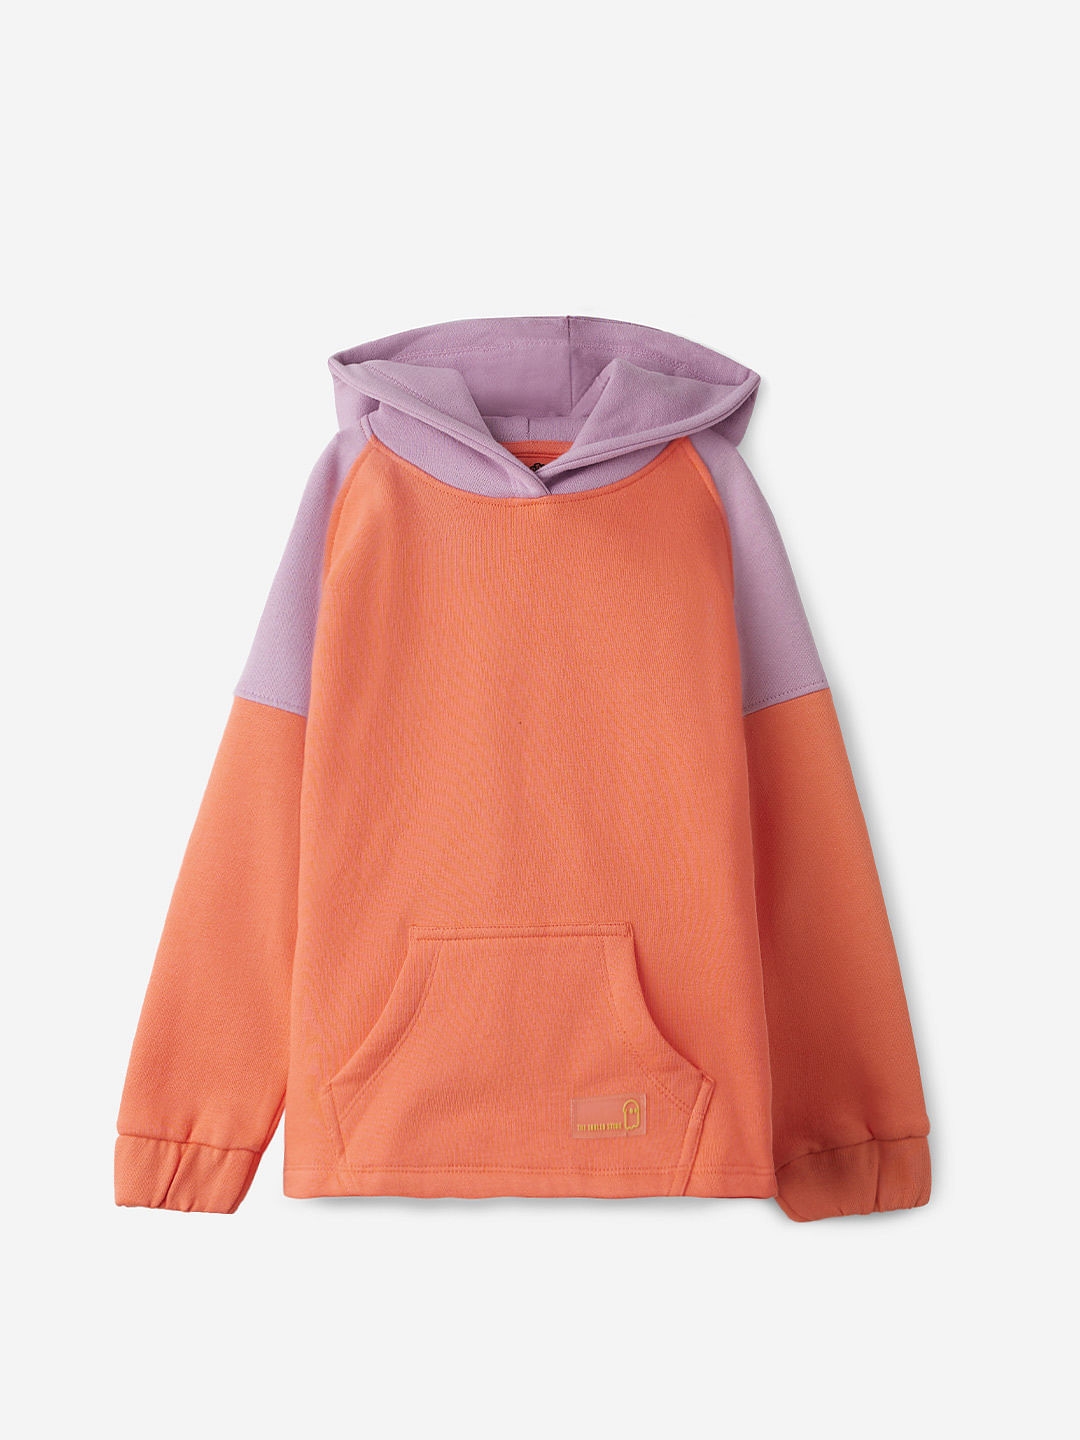 The Souled Store | Girls Solids: Pink, Purple (Colourblock) Girls Cotton Hoodie